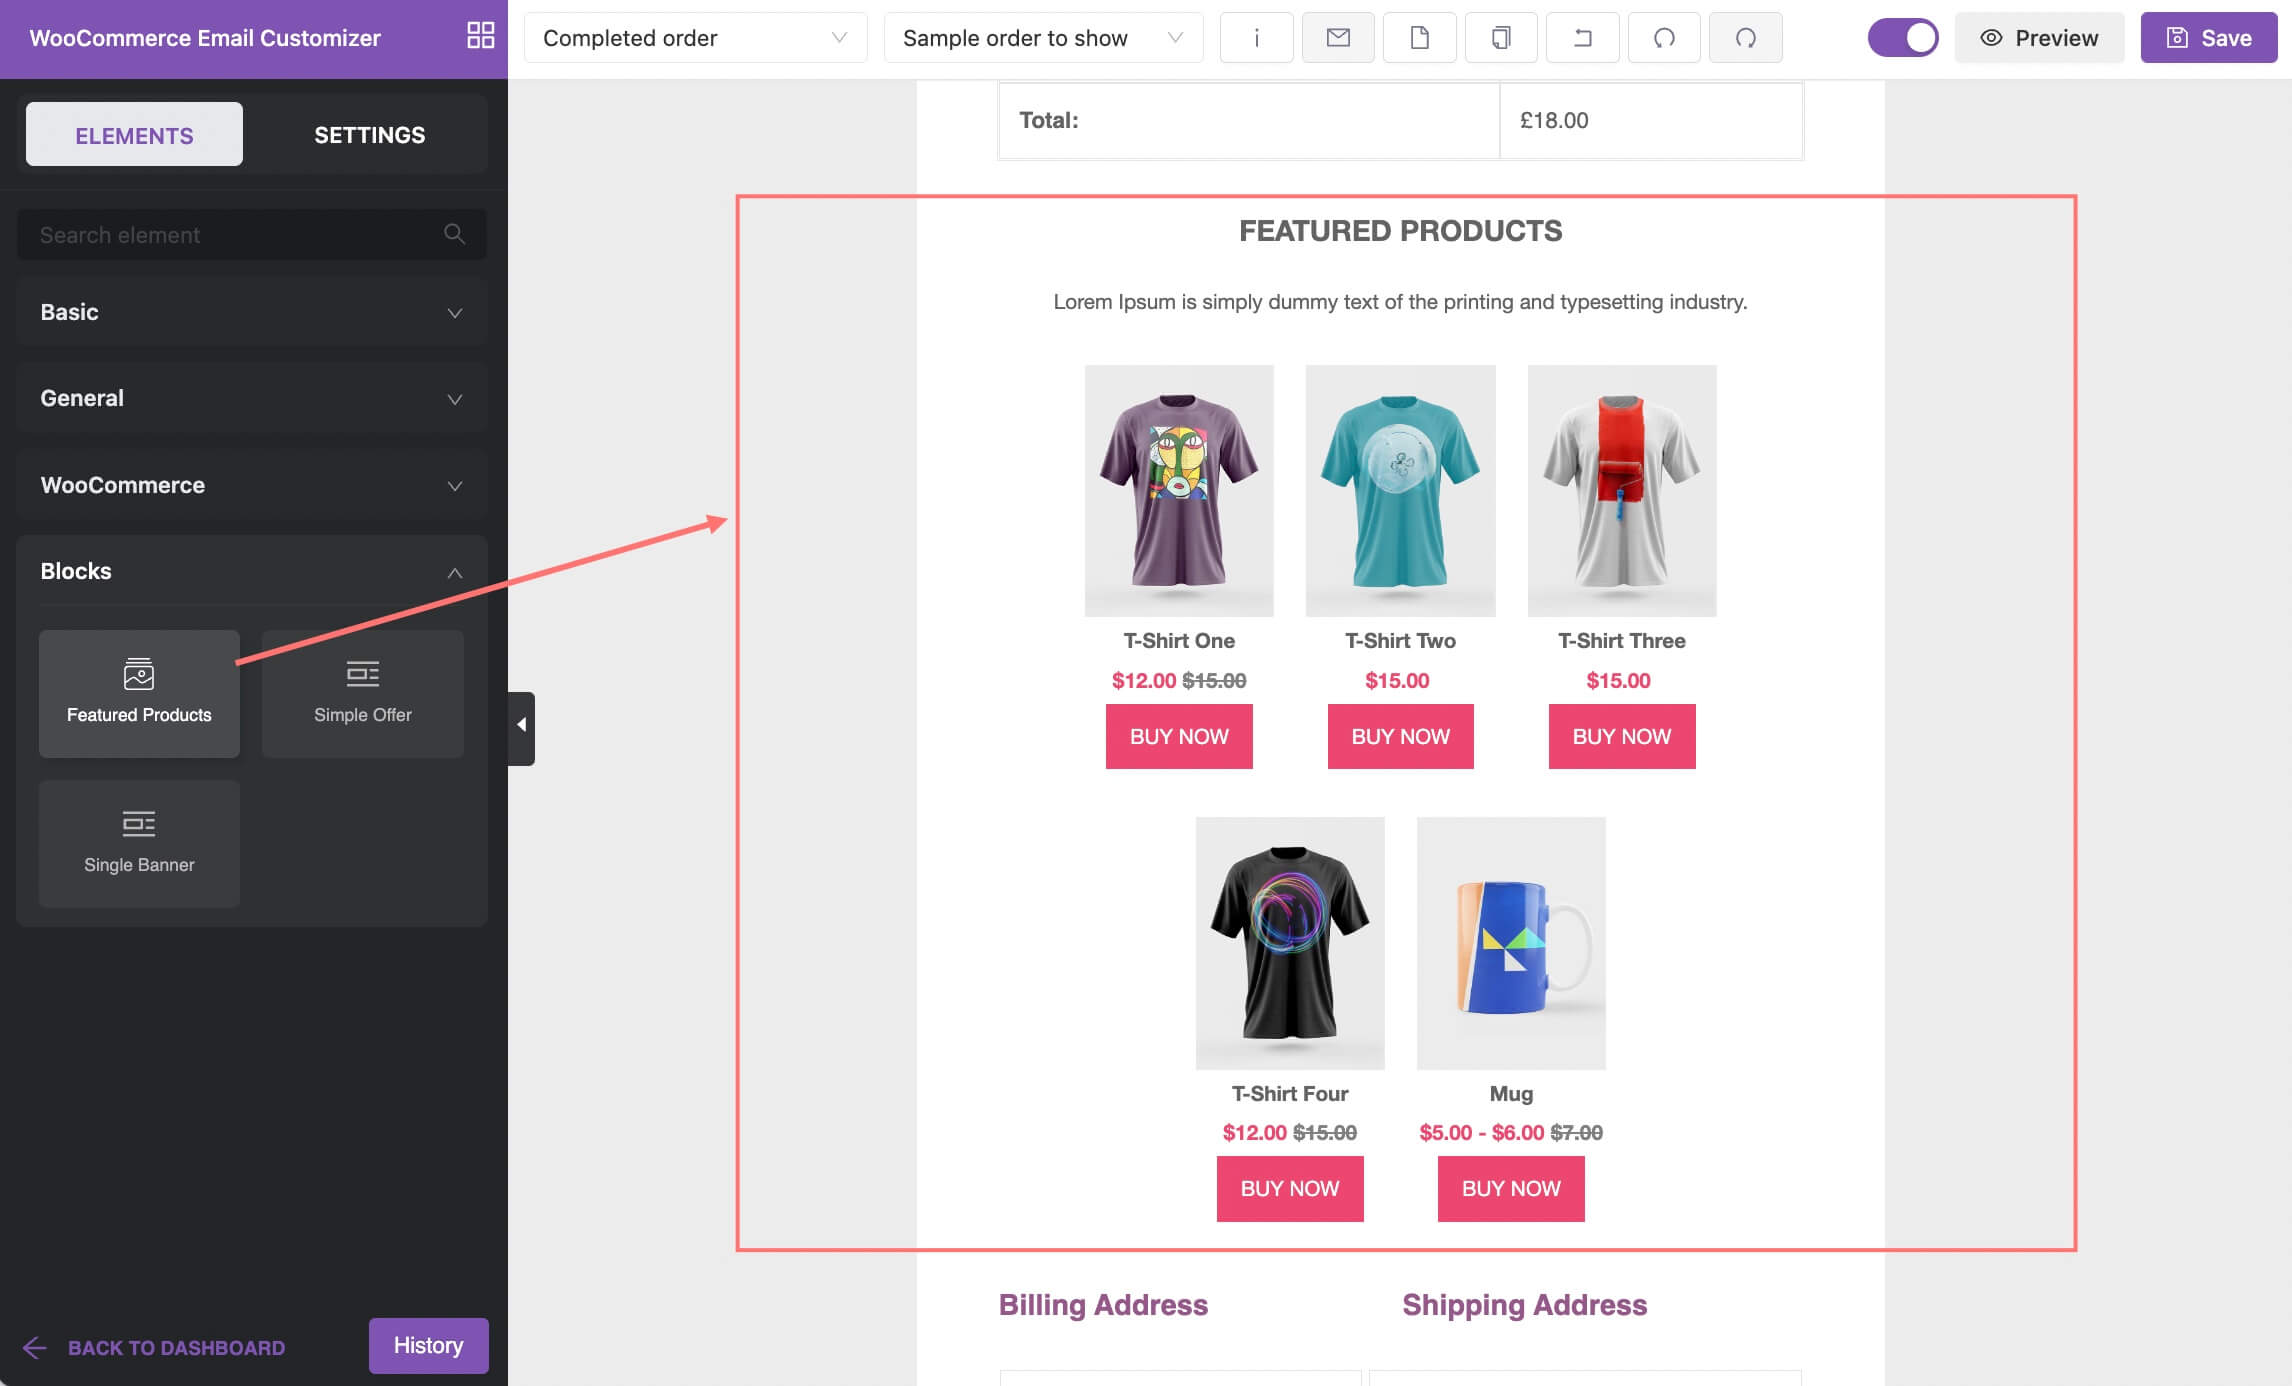 Featured products in WooCommerce email templates